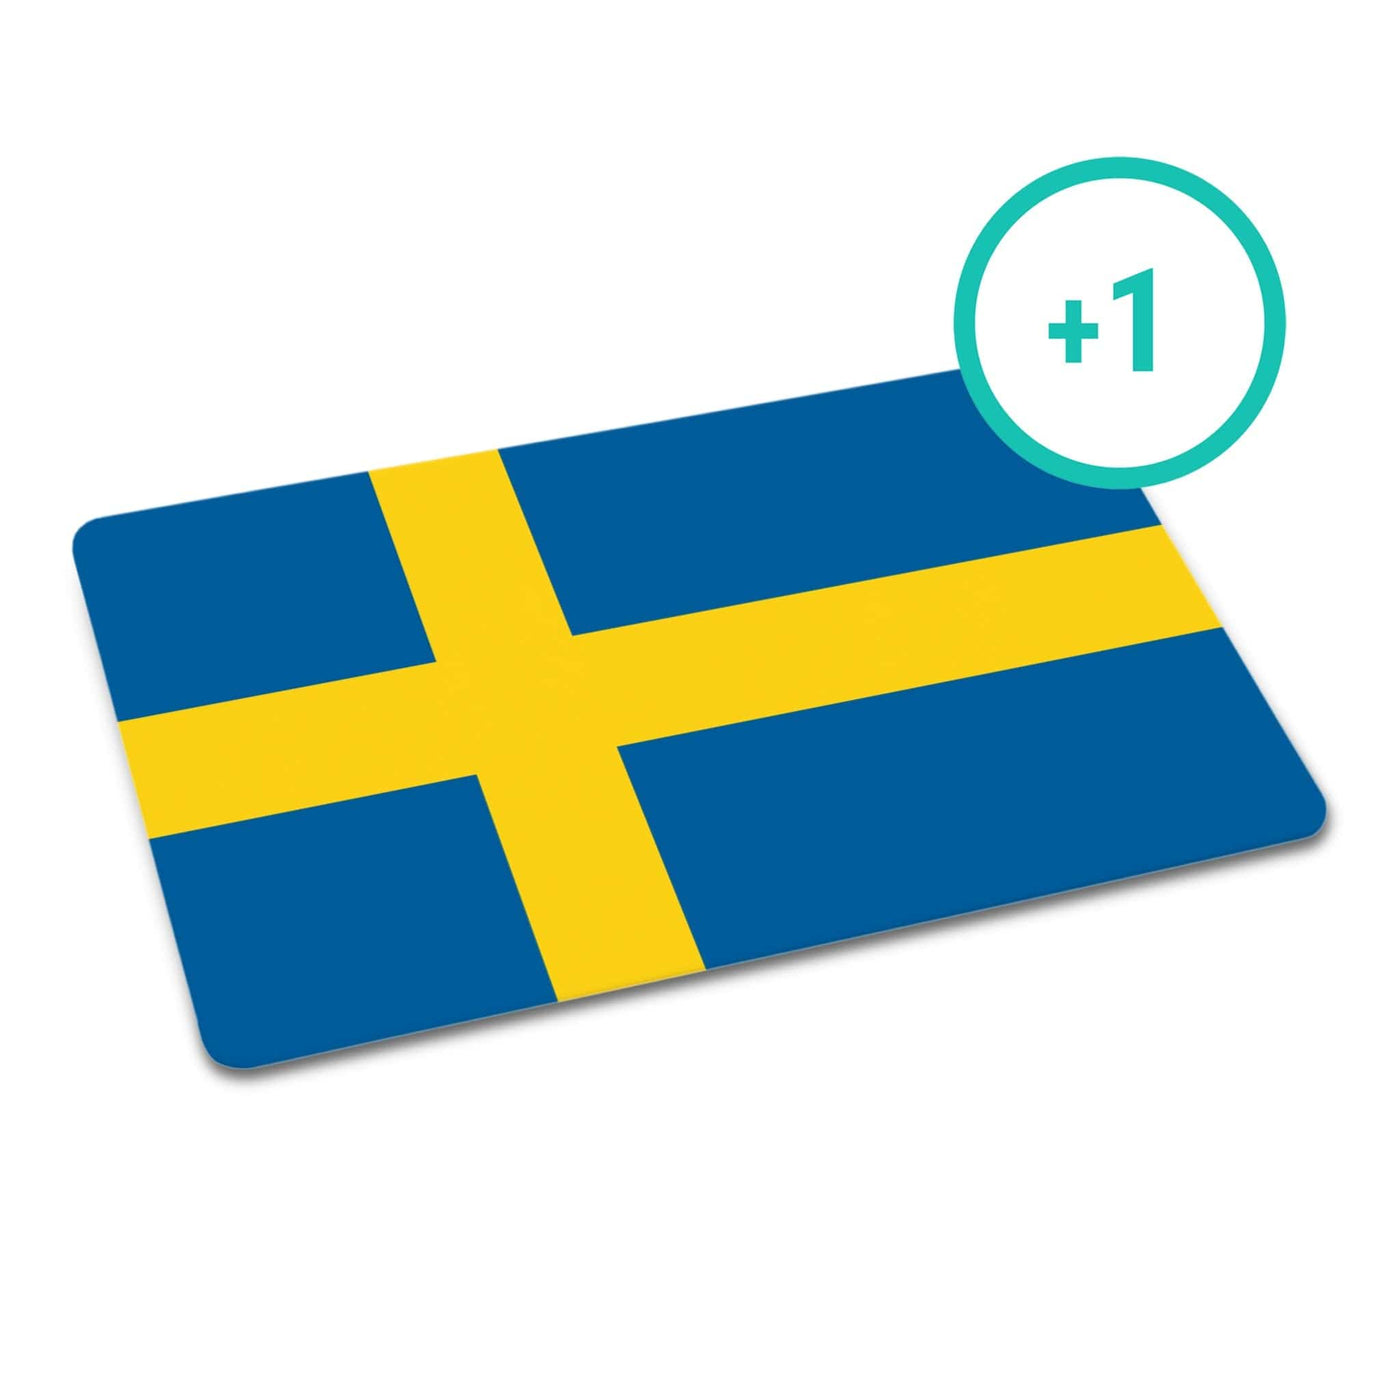 Additional Customized Card: Swedish (Leave in cart to purchase)